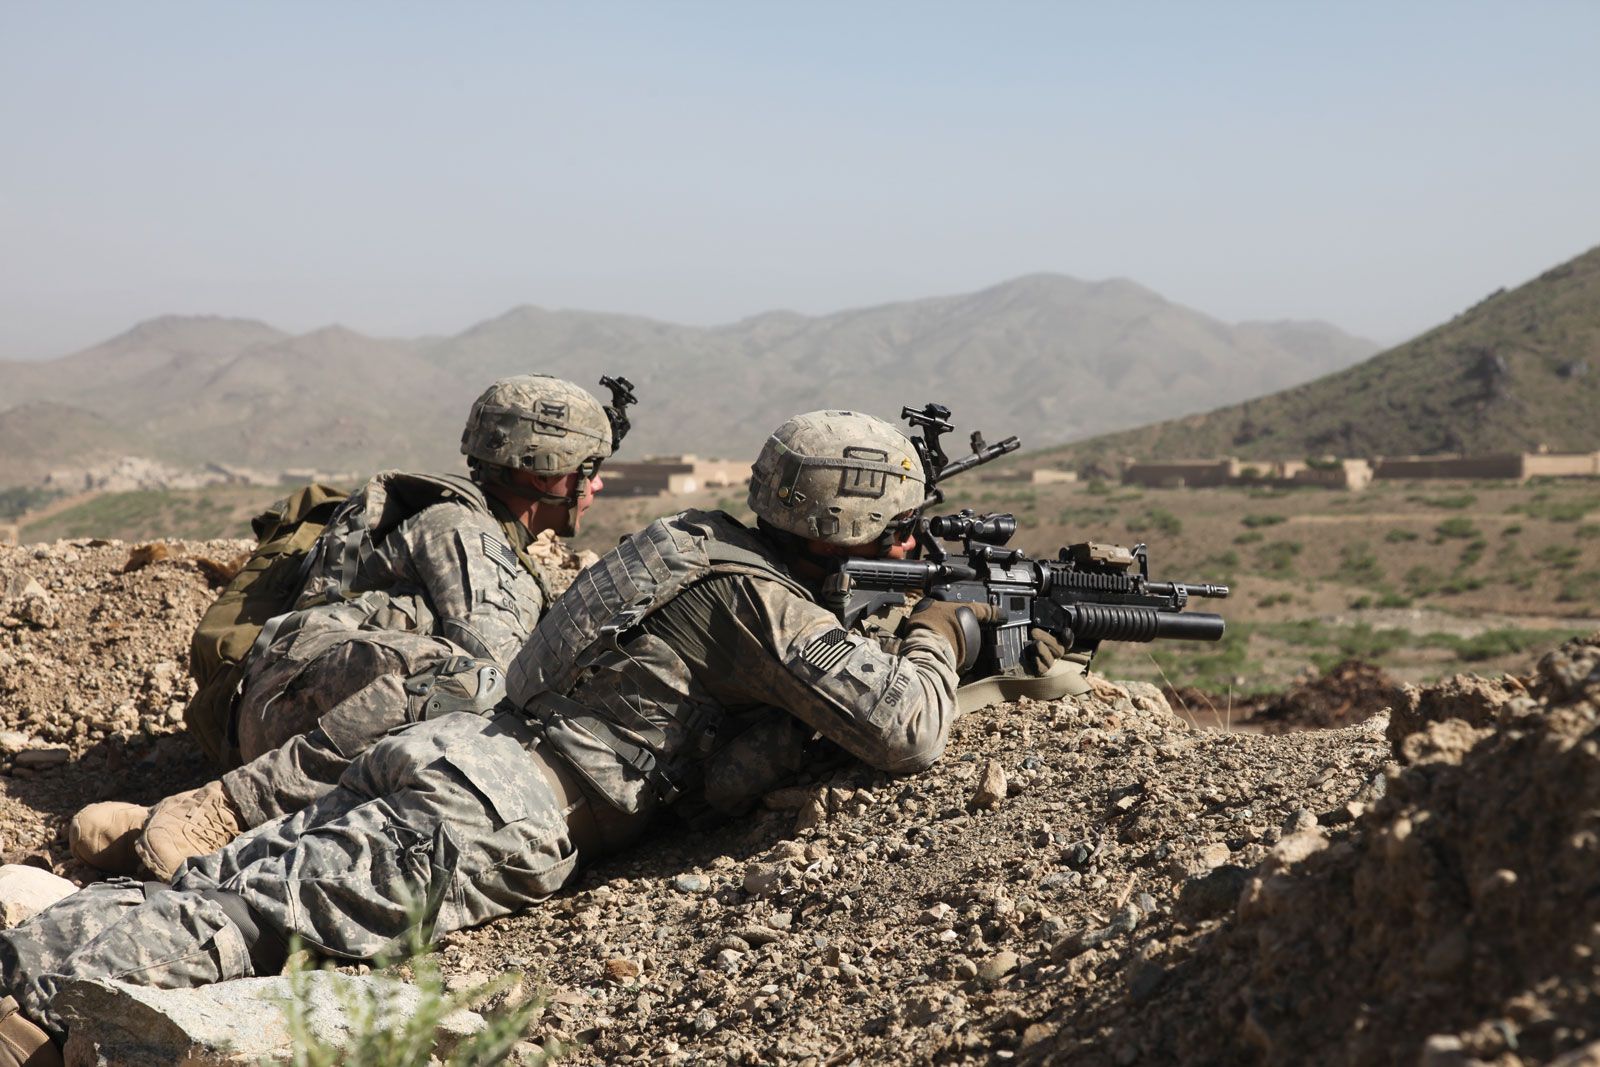 US-Army-soldiers-security-duty-province-Paktika-2010.jpg